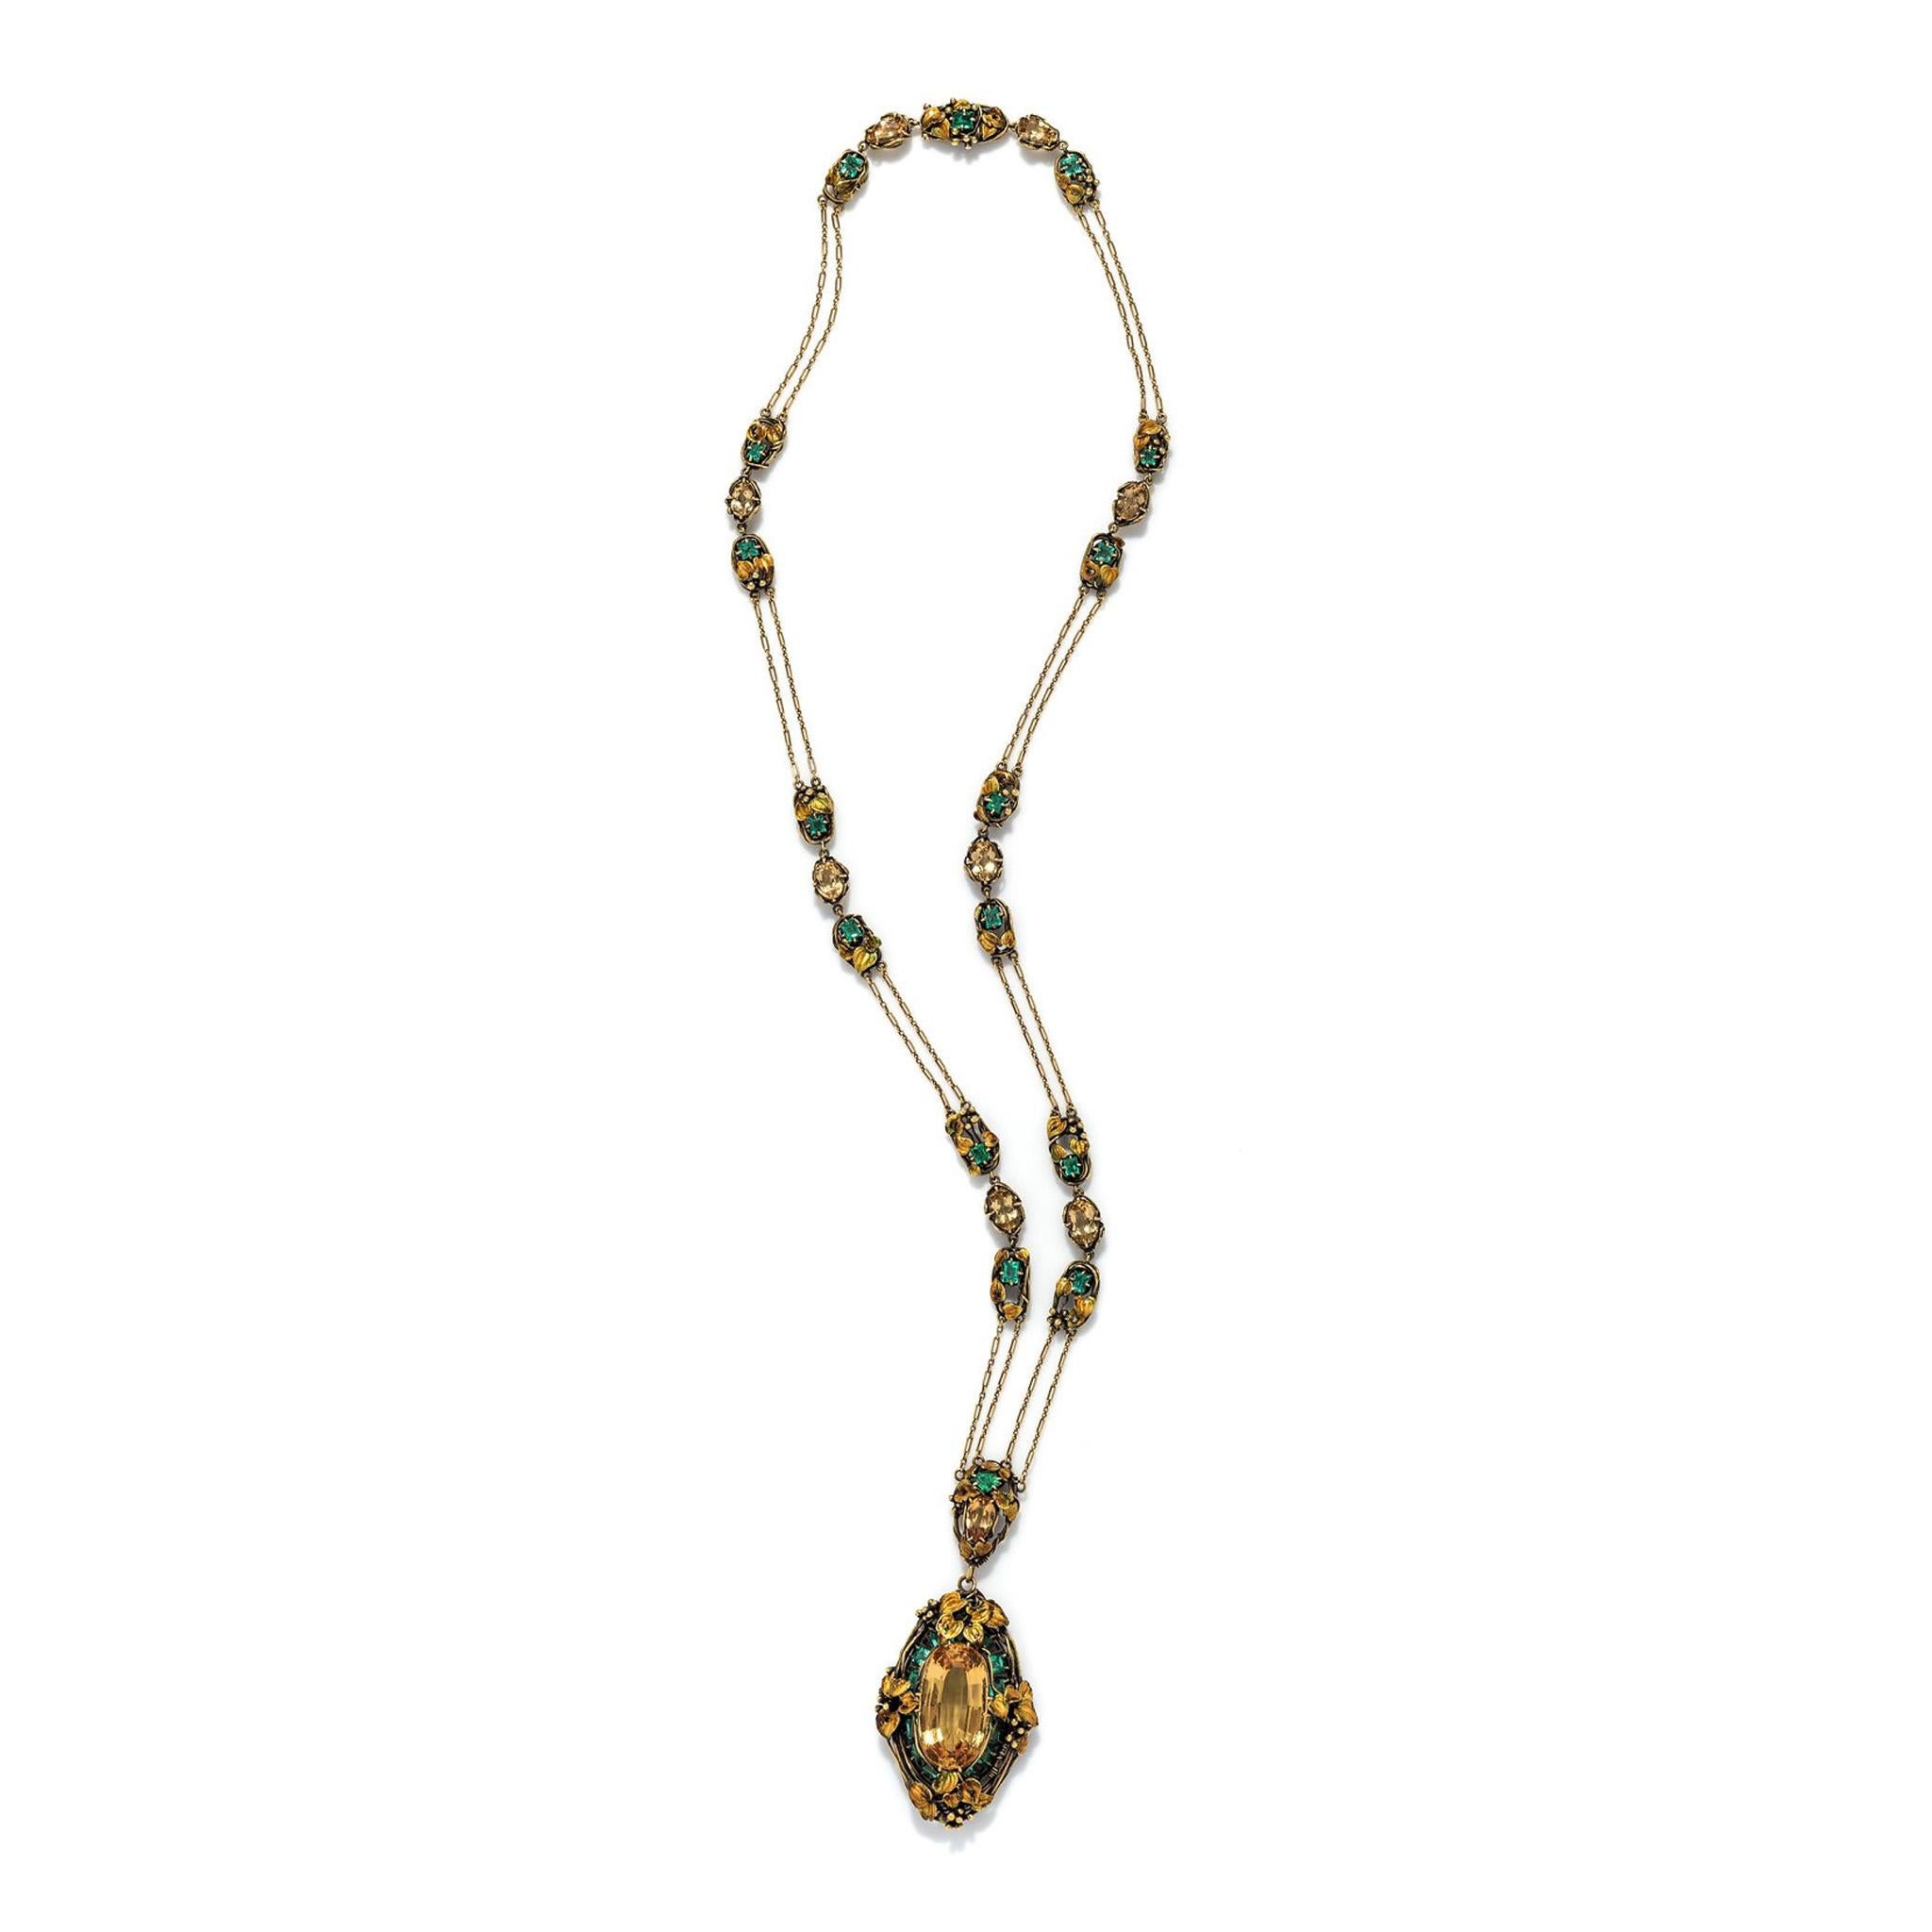 Dating from 1910-1915, this unusual and alluring necklace belongs to a group of jewels exploring one of Louis Comfort Tiffany’s favorite motifs, the fruiting grapevine, in a blue-green and gold palette. The pendant, with its substantial golden topaz